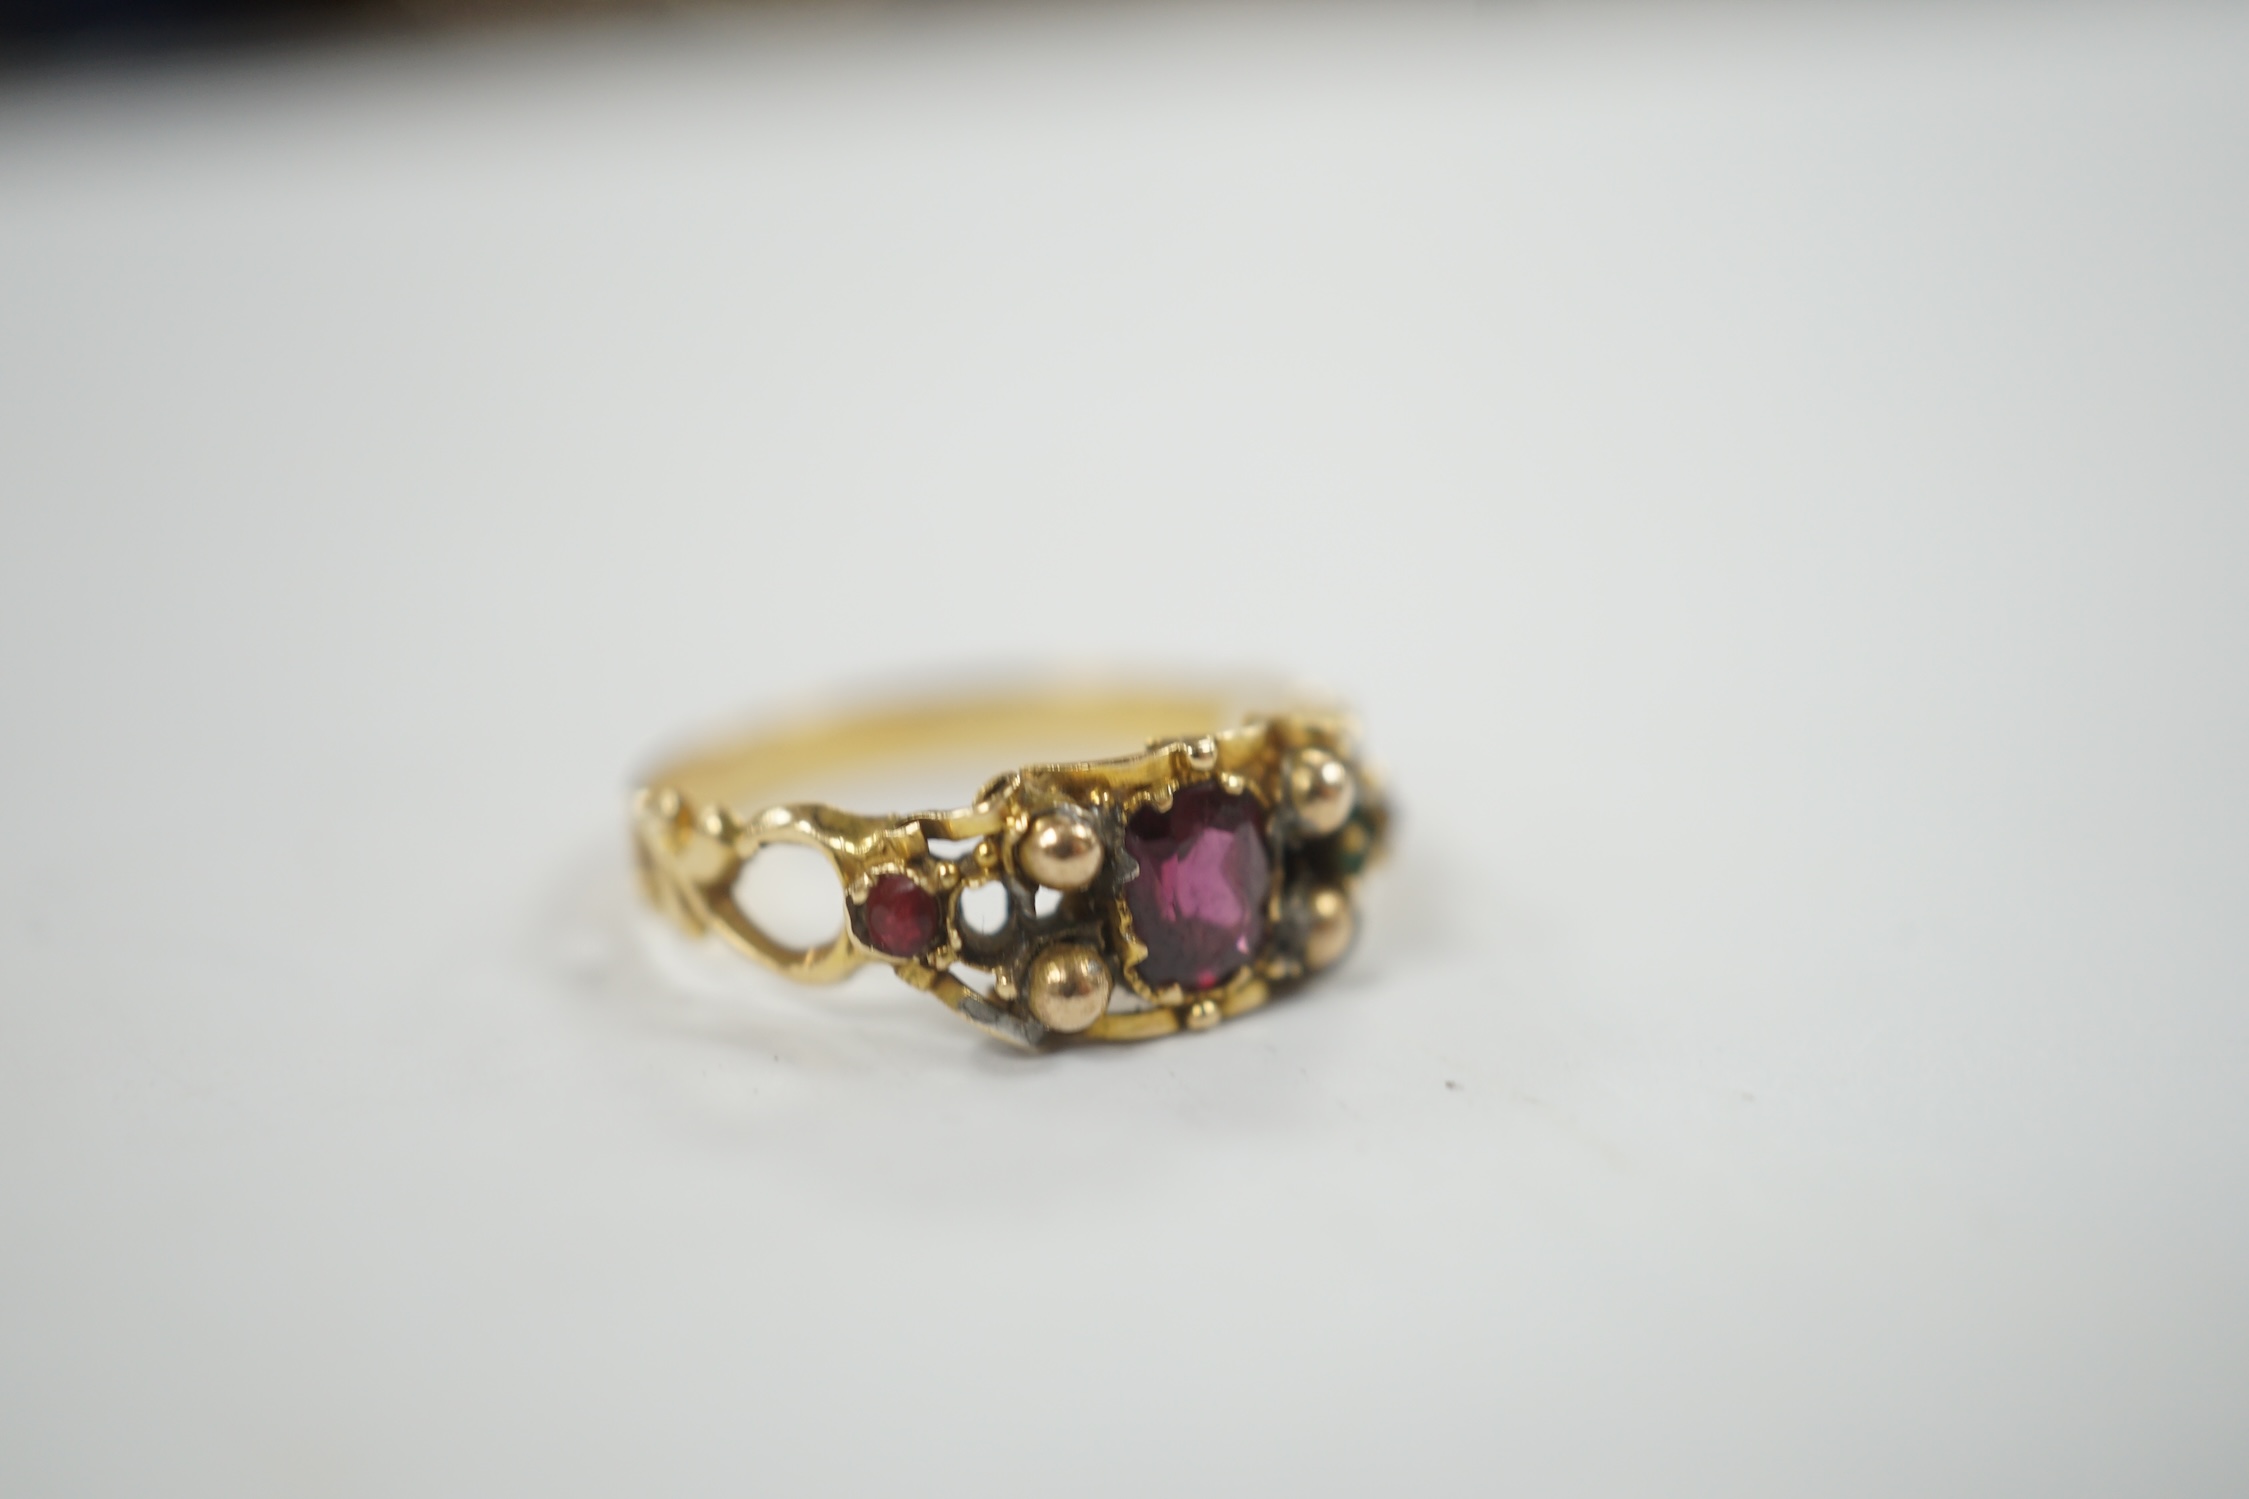 A Victorian yellow metal, garnet, ruby? and emerald set dress ring, (stones missing), size L, gross weight 1.8 grams.